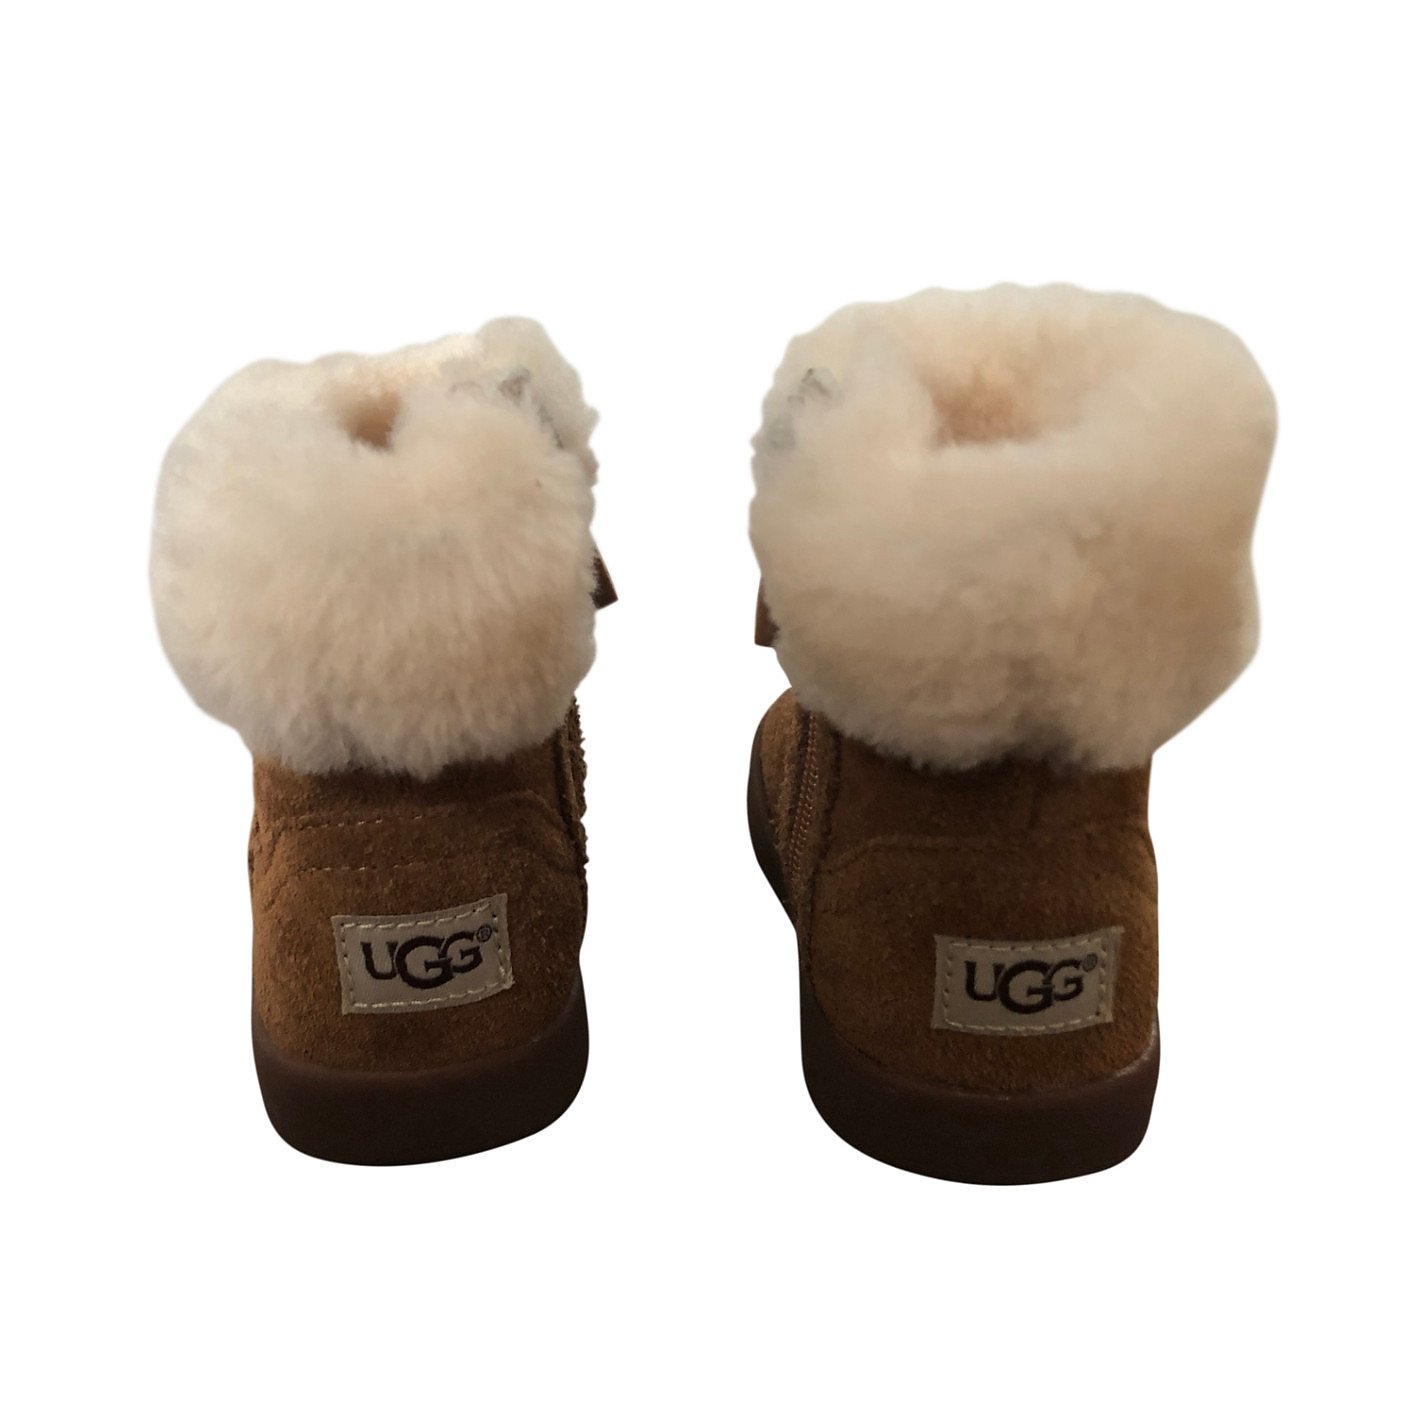 are ugg boots made with real fur